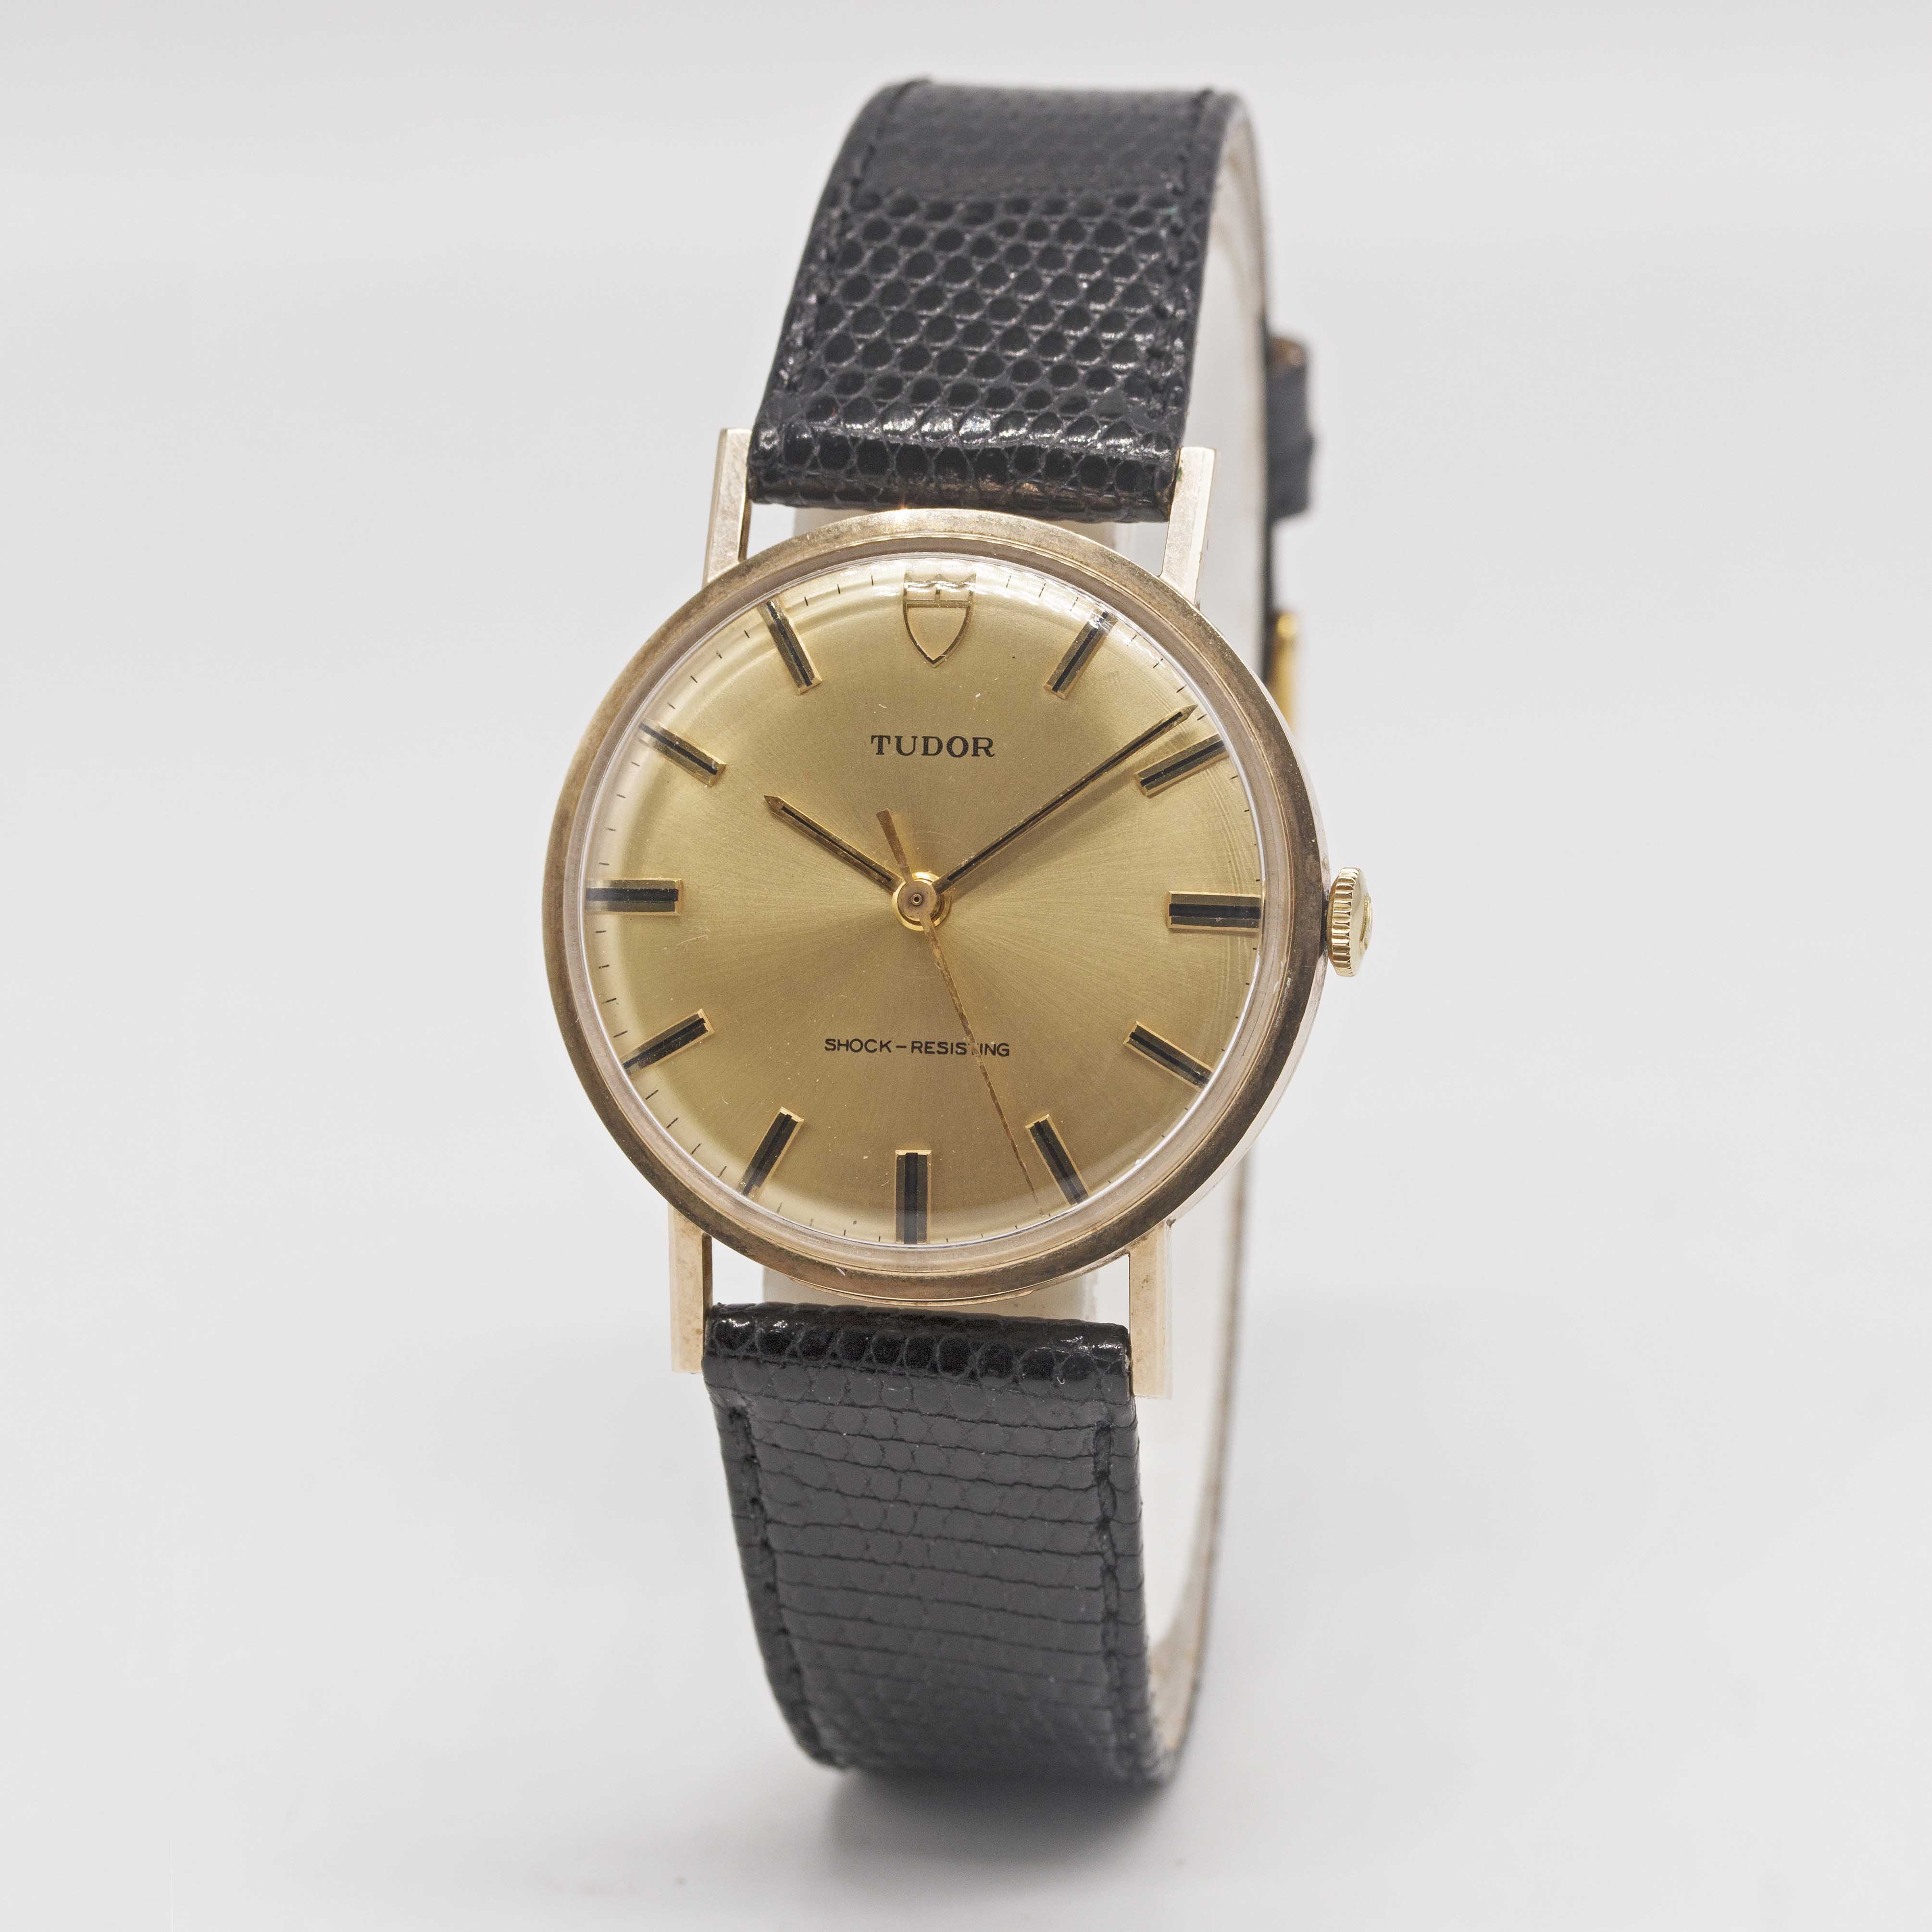 A GENTLEMAN'S 9CT SOLID GOLD ROLEX TUDOR SHOCK RESISTING WRIST WATCH CIRCA 1969, WITH CHAMPAGNE - Image 3 of 10